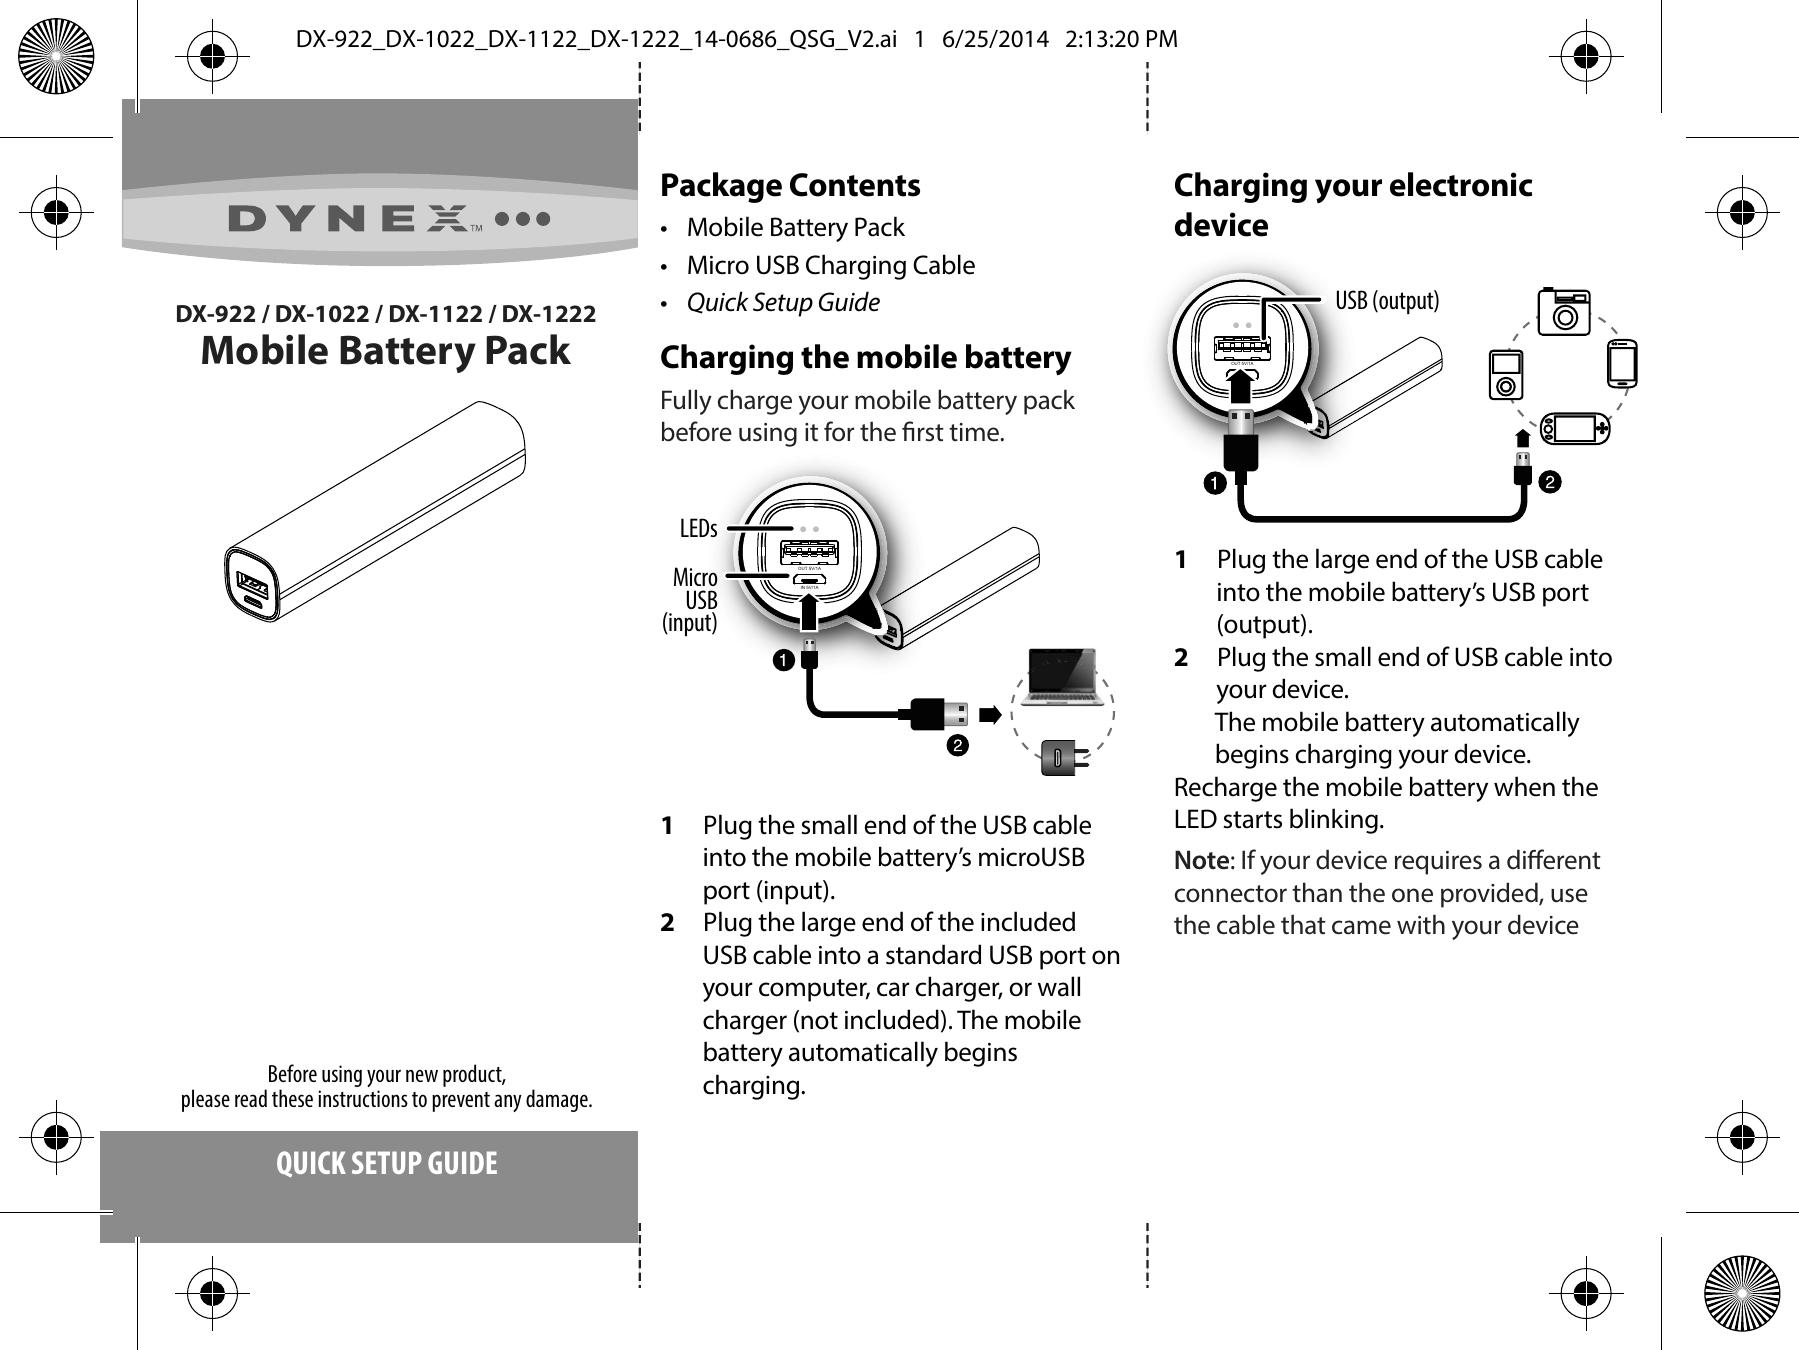 Dynex DX-922 Marine Battery User Manual (Page 1)